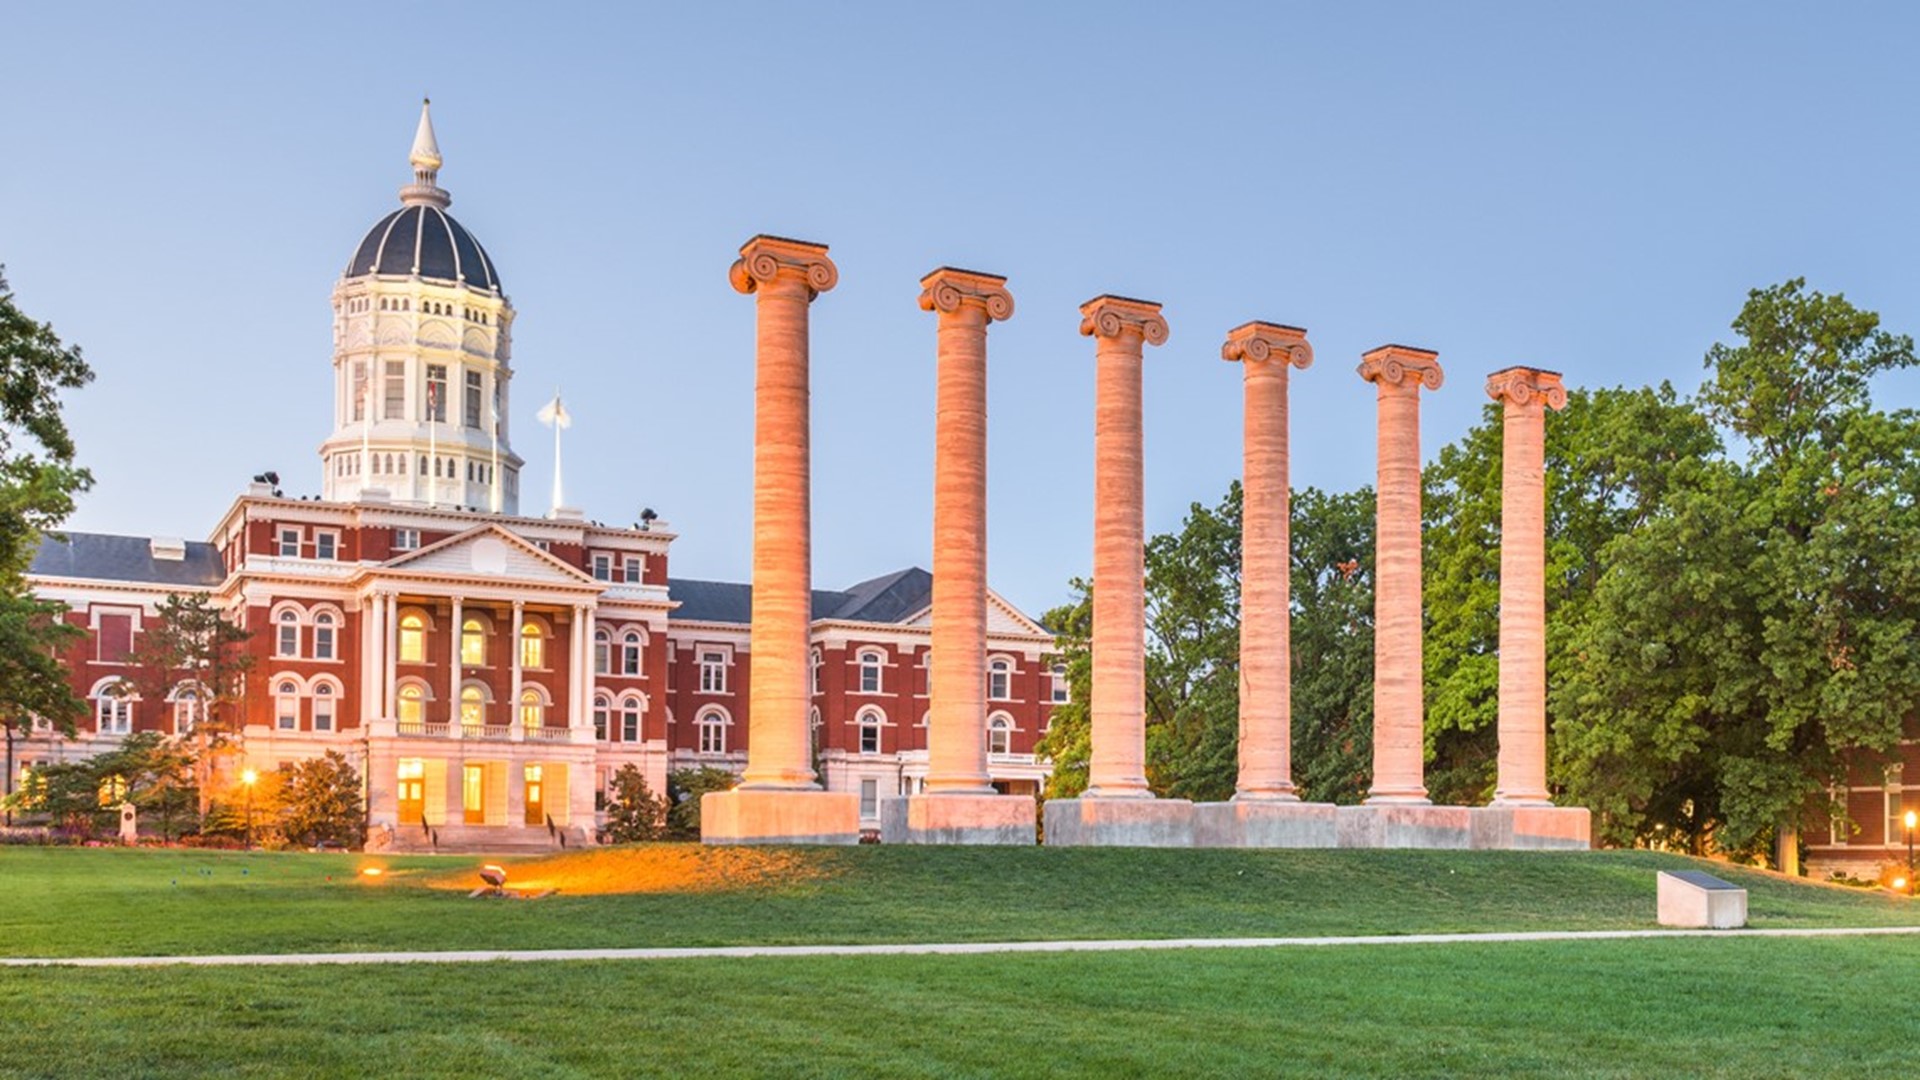 Mizzou said Thursday that all students, faculty, staff and visitors will be required to wear masks indoors where social distancing isn't possible